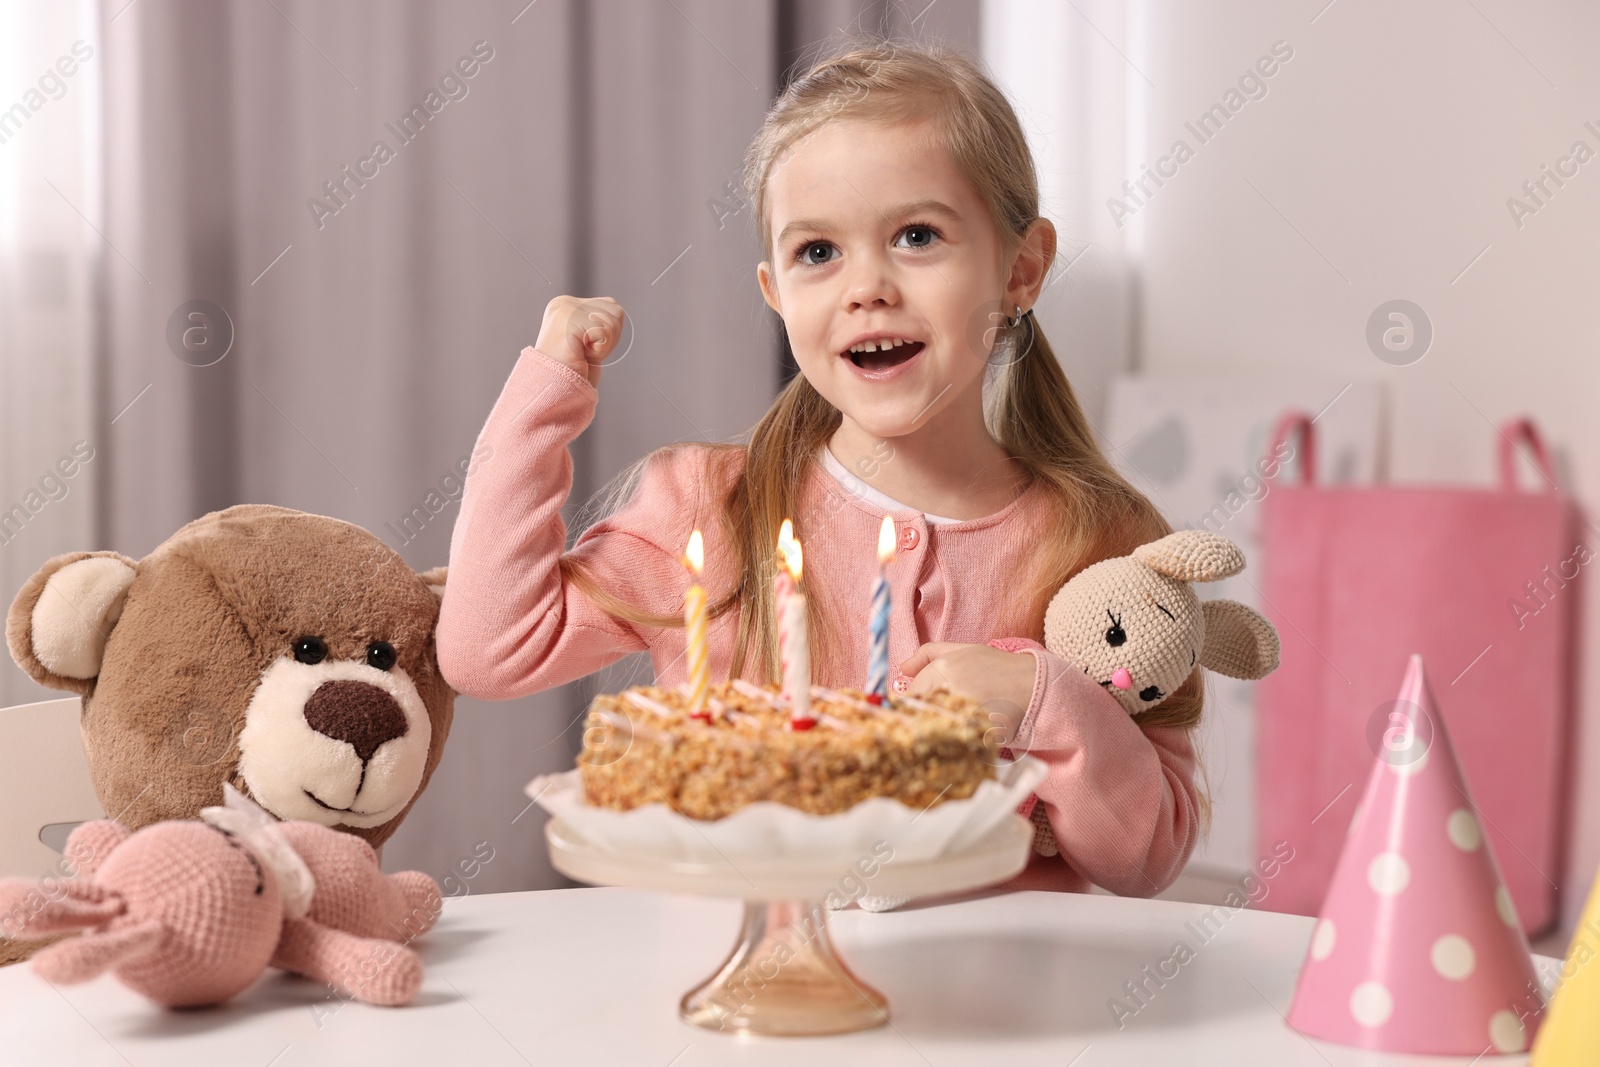 Photo of Cute girl with birthday cake and toys at table indoors